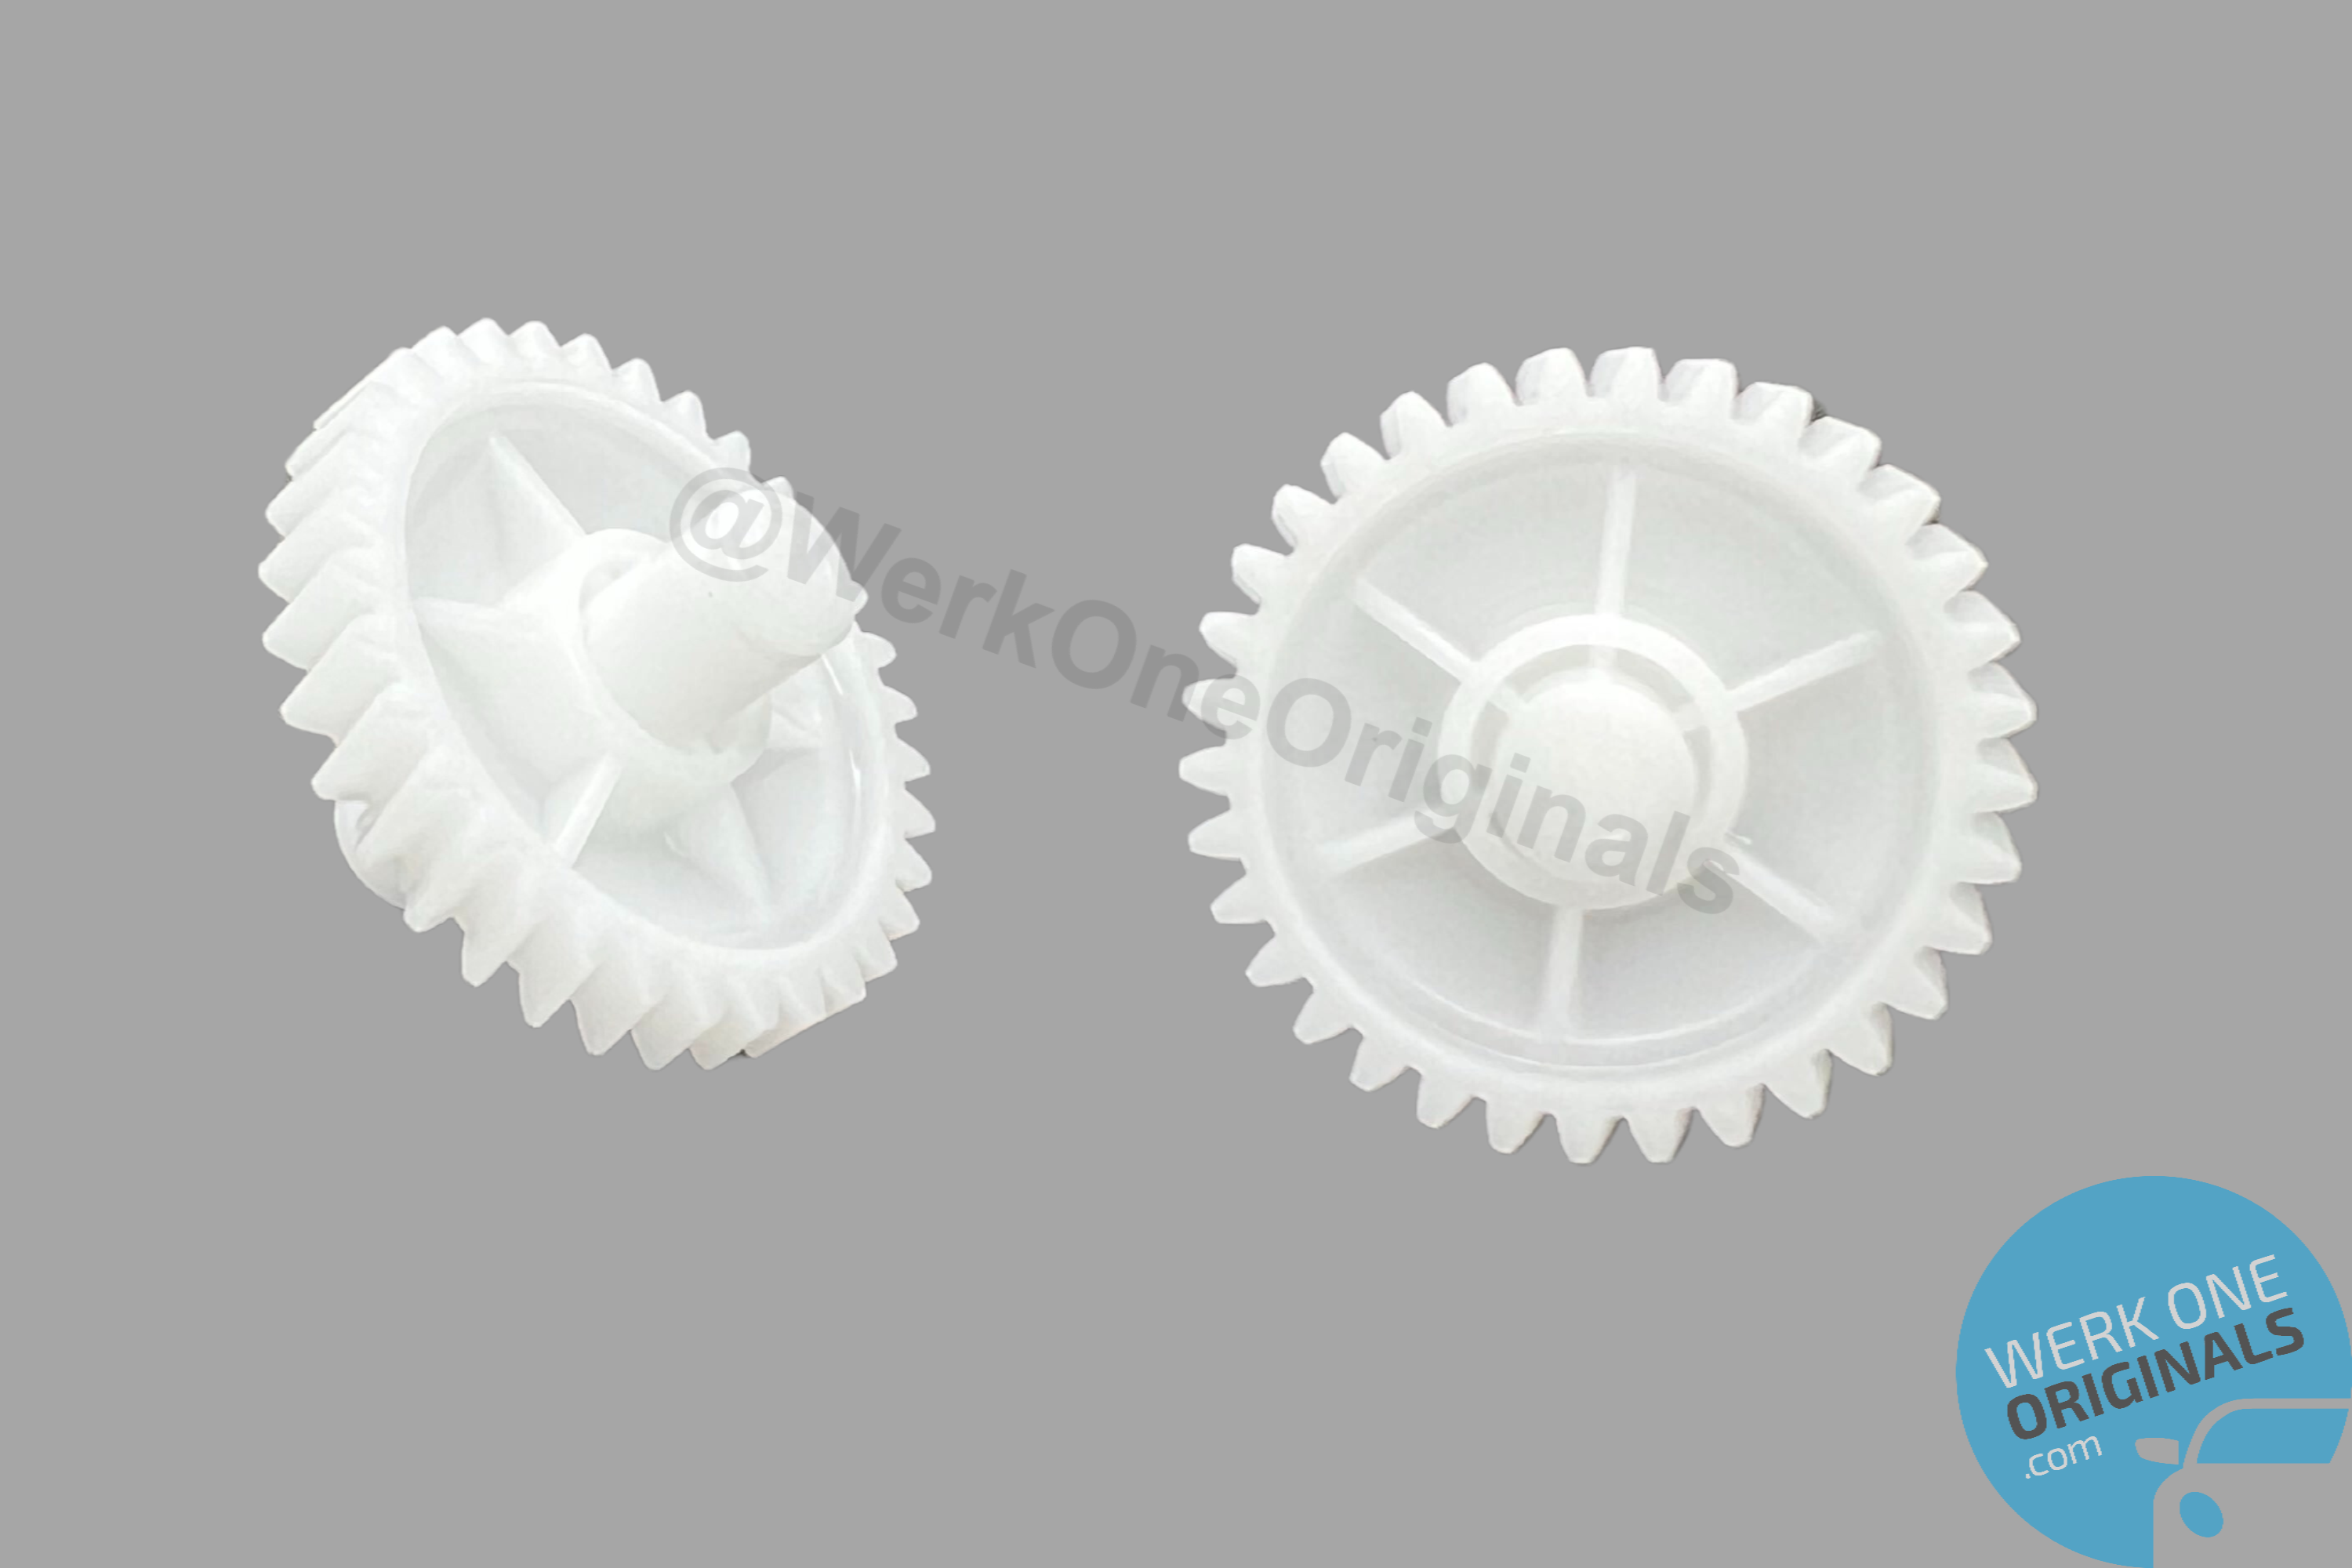 Porsche Genuine Replacement Sunroof Drive Gears x2 for 968 Models